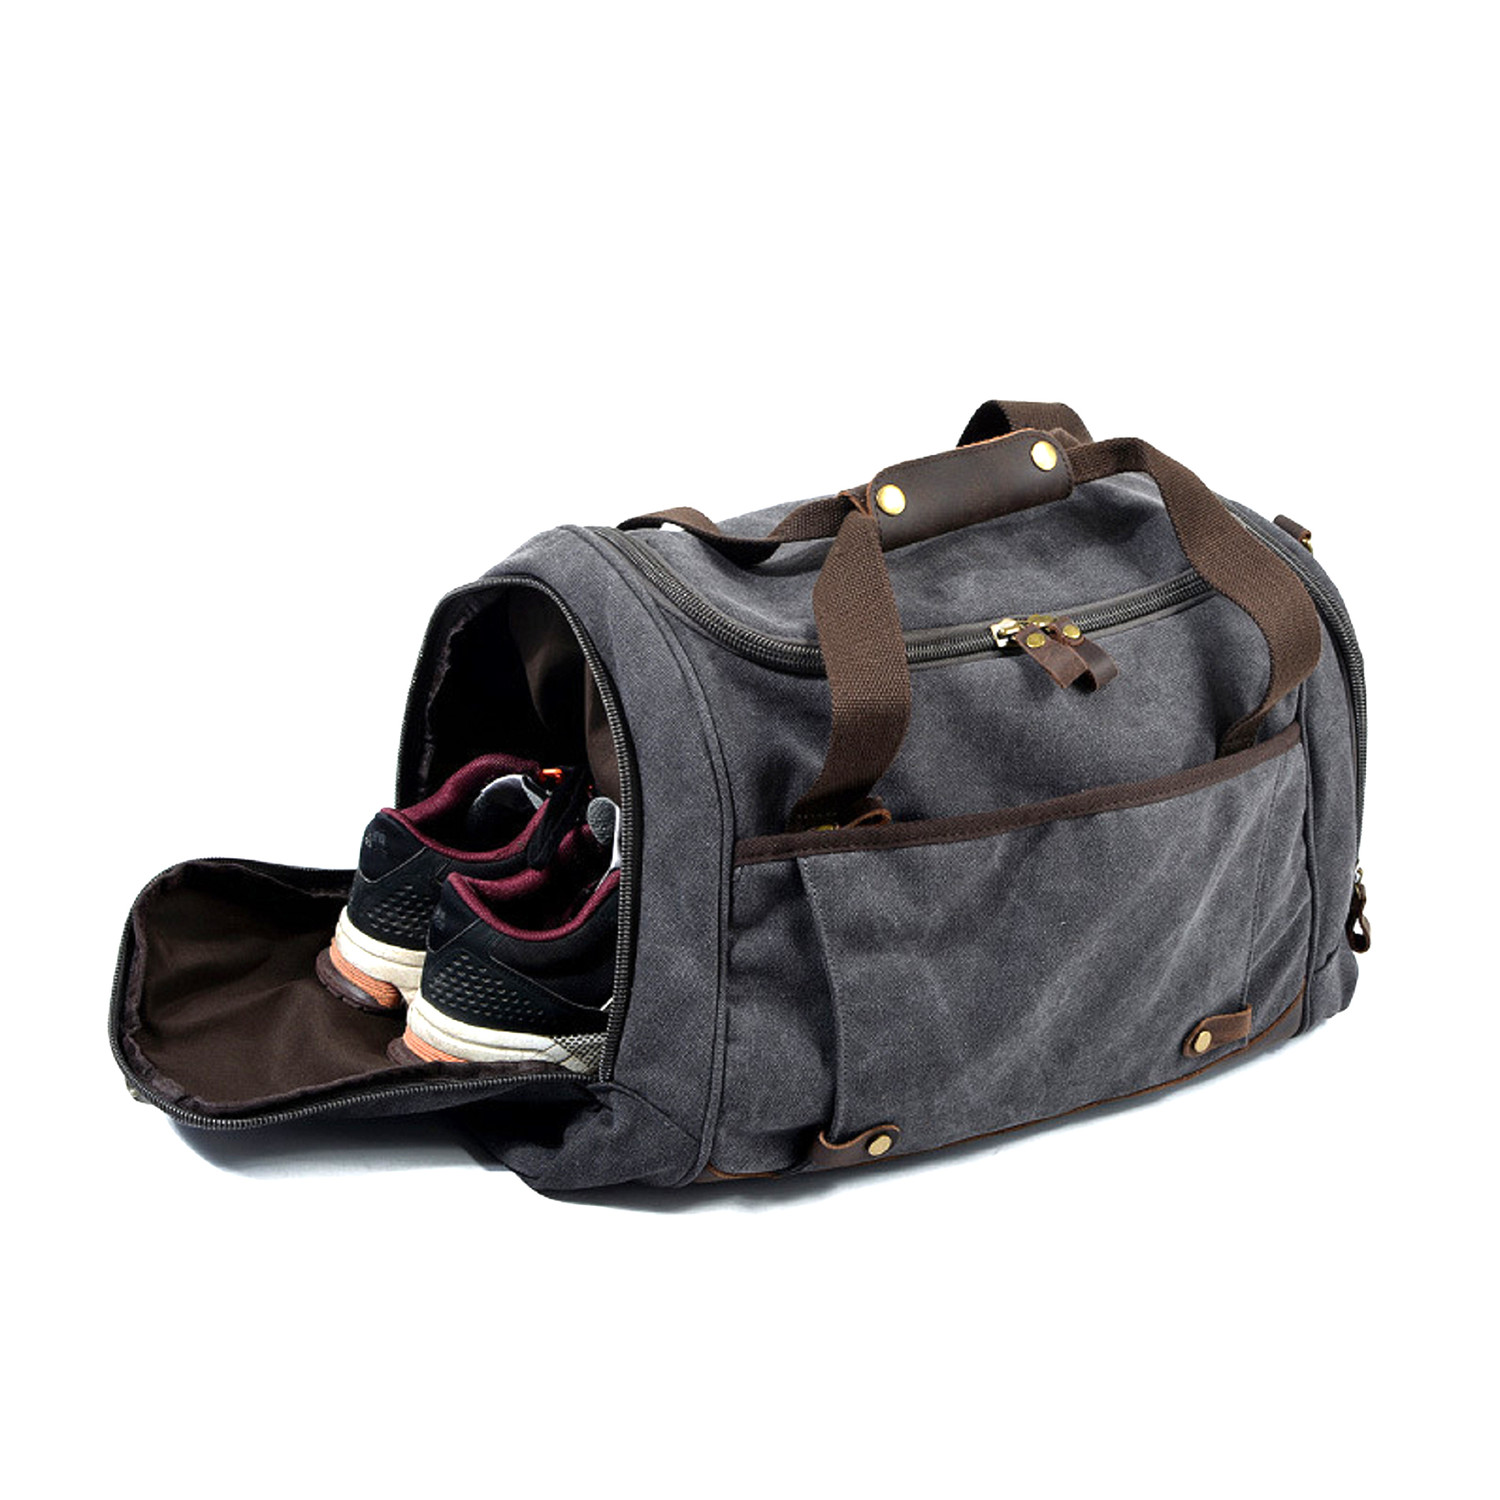 Wholesale Large Canvas  Gym Travel Luggage Bag with Waterproof Shoe Compartment